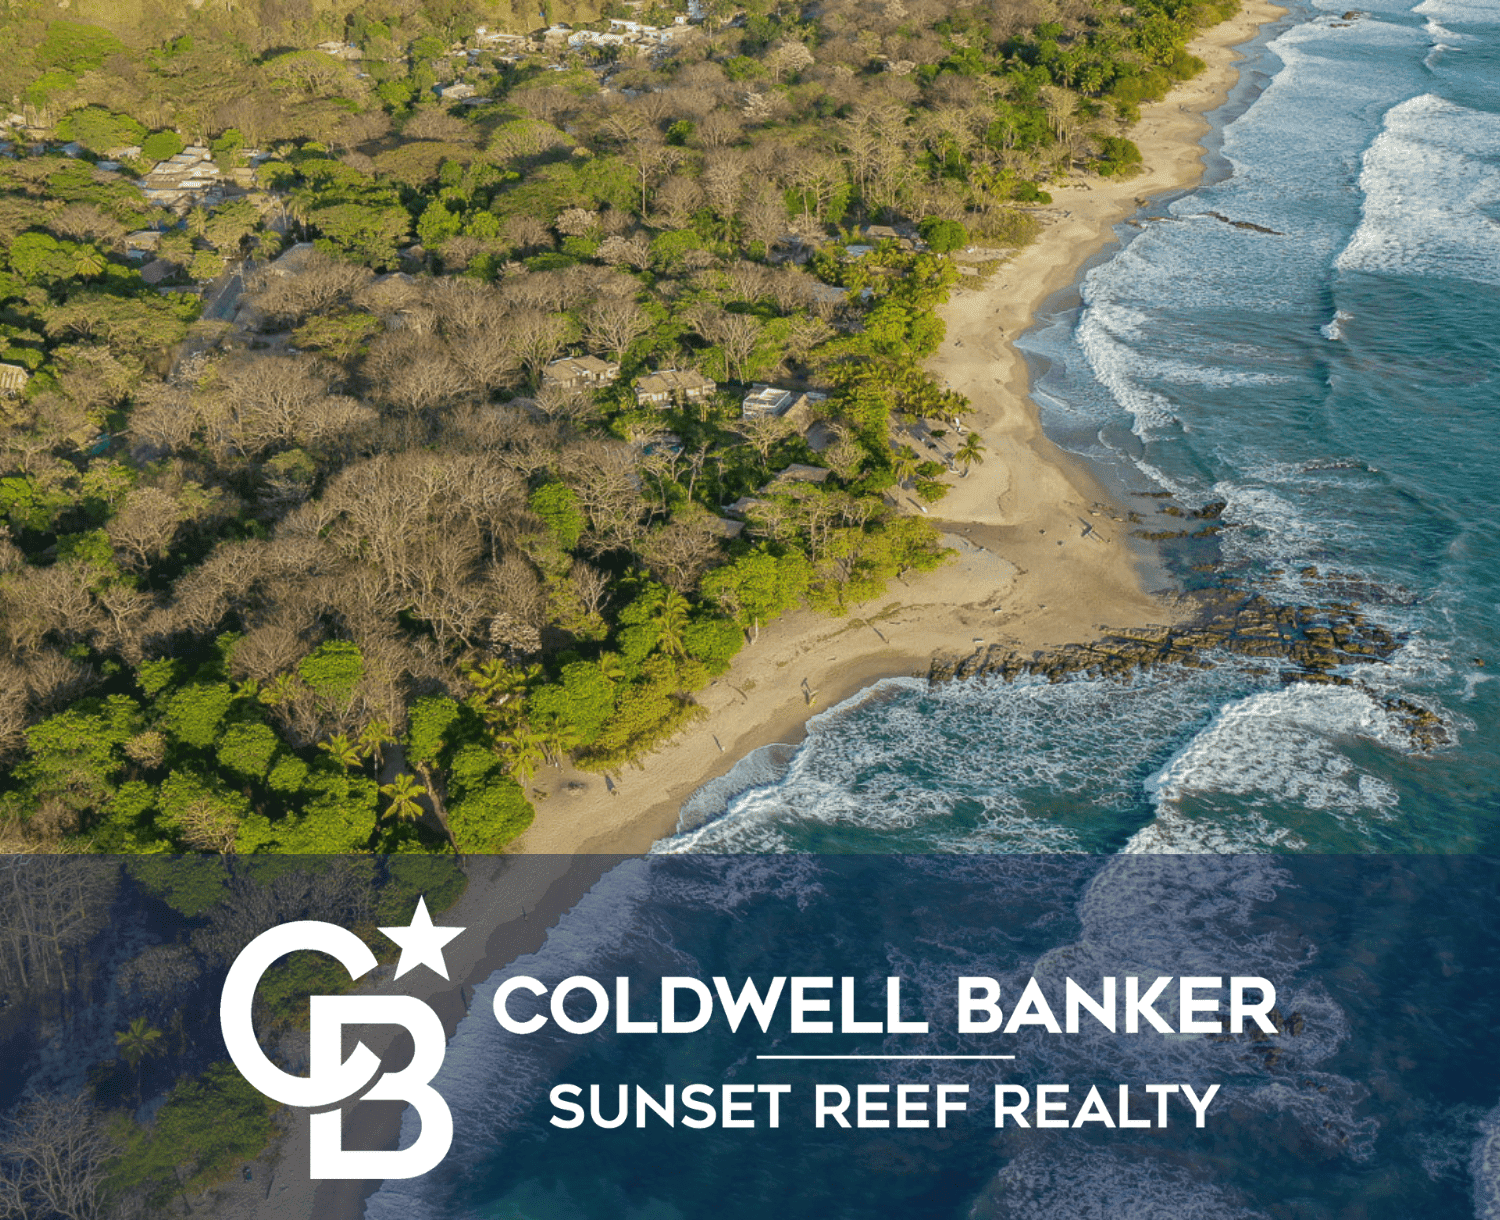 Coldwell Banker Sunset Reef Realty